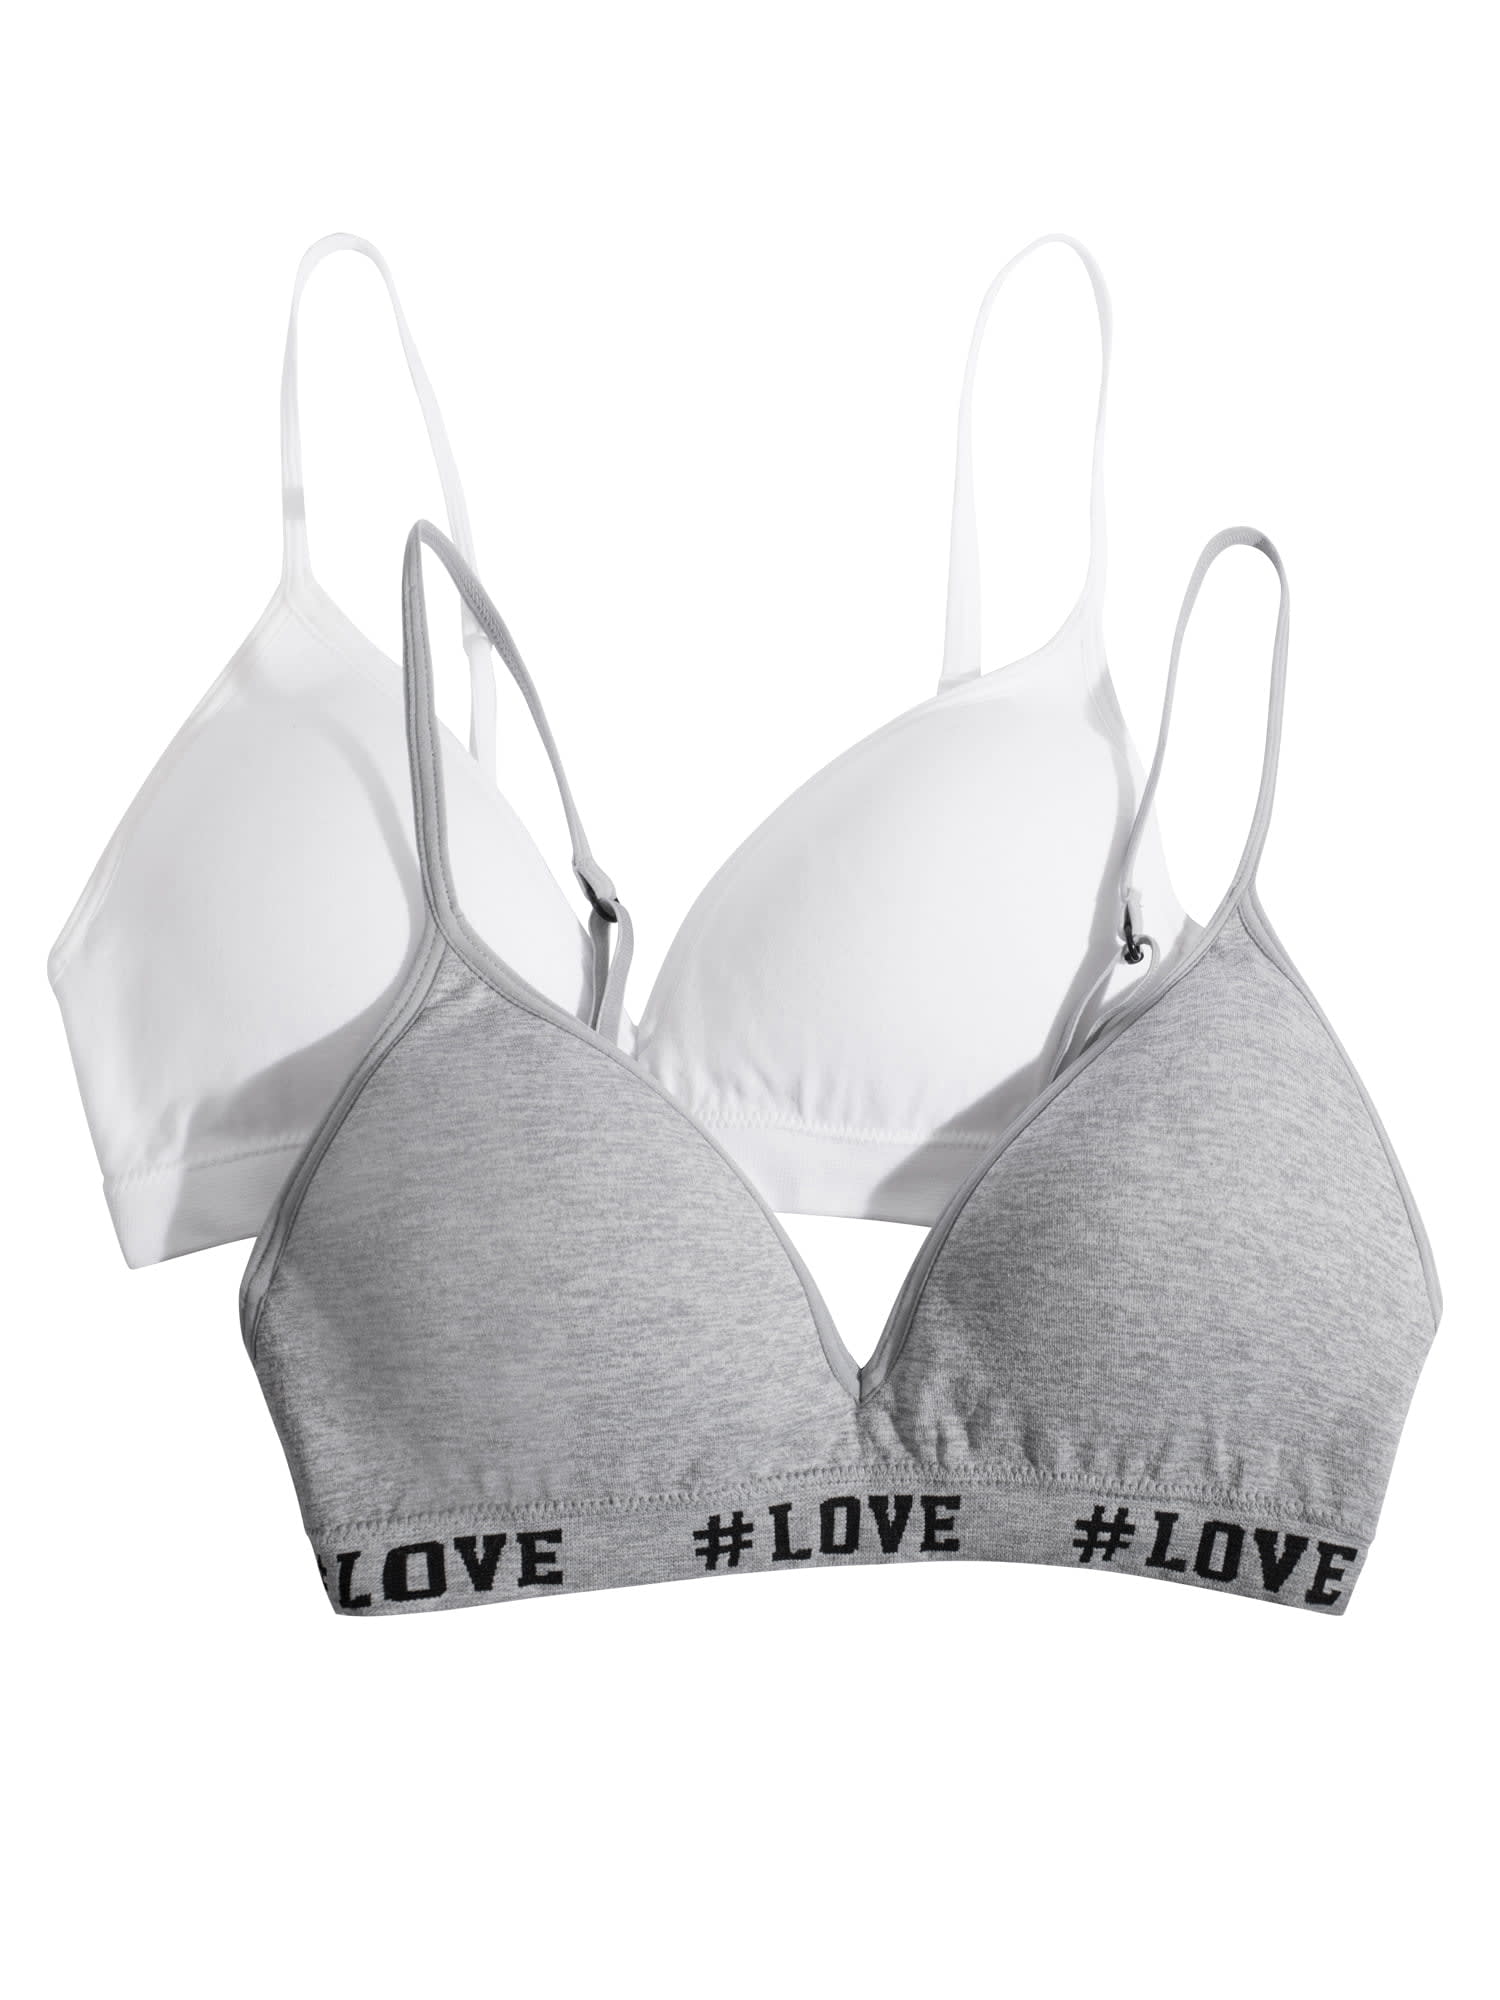 Womens Bras, Panties & Lingerie - DroneUp Delivery